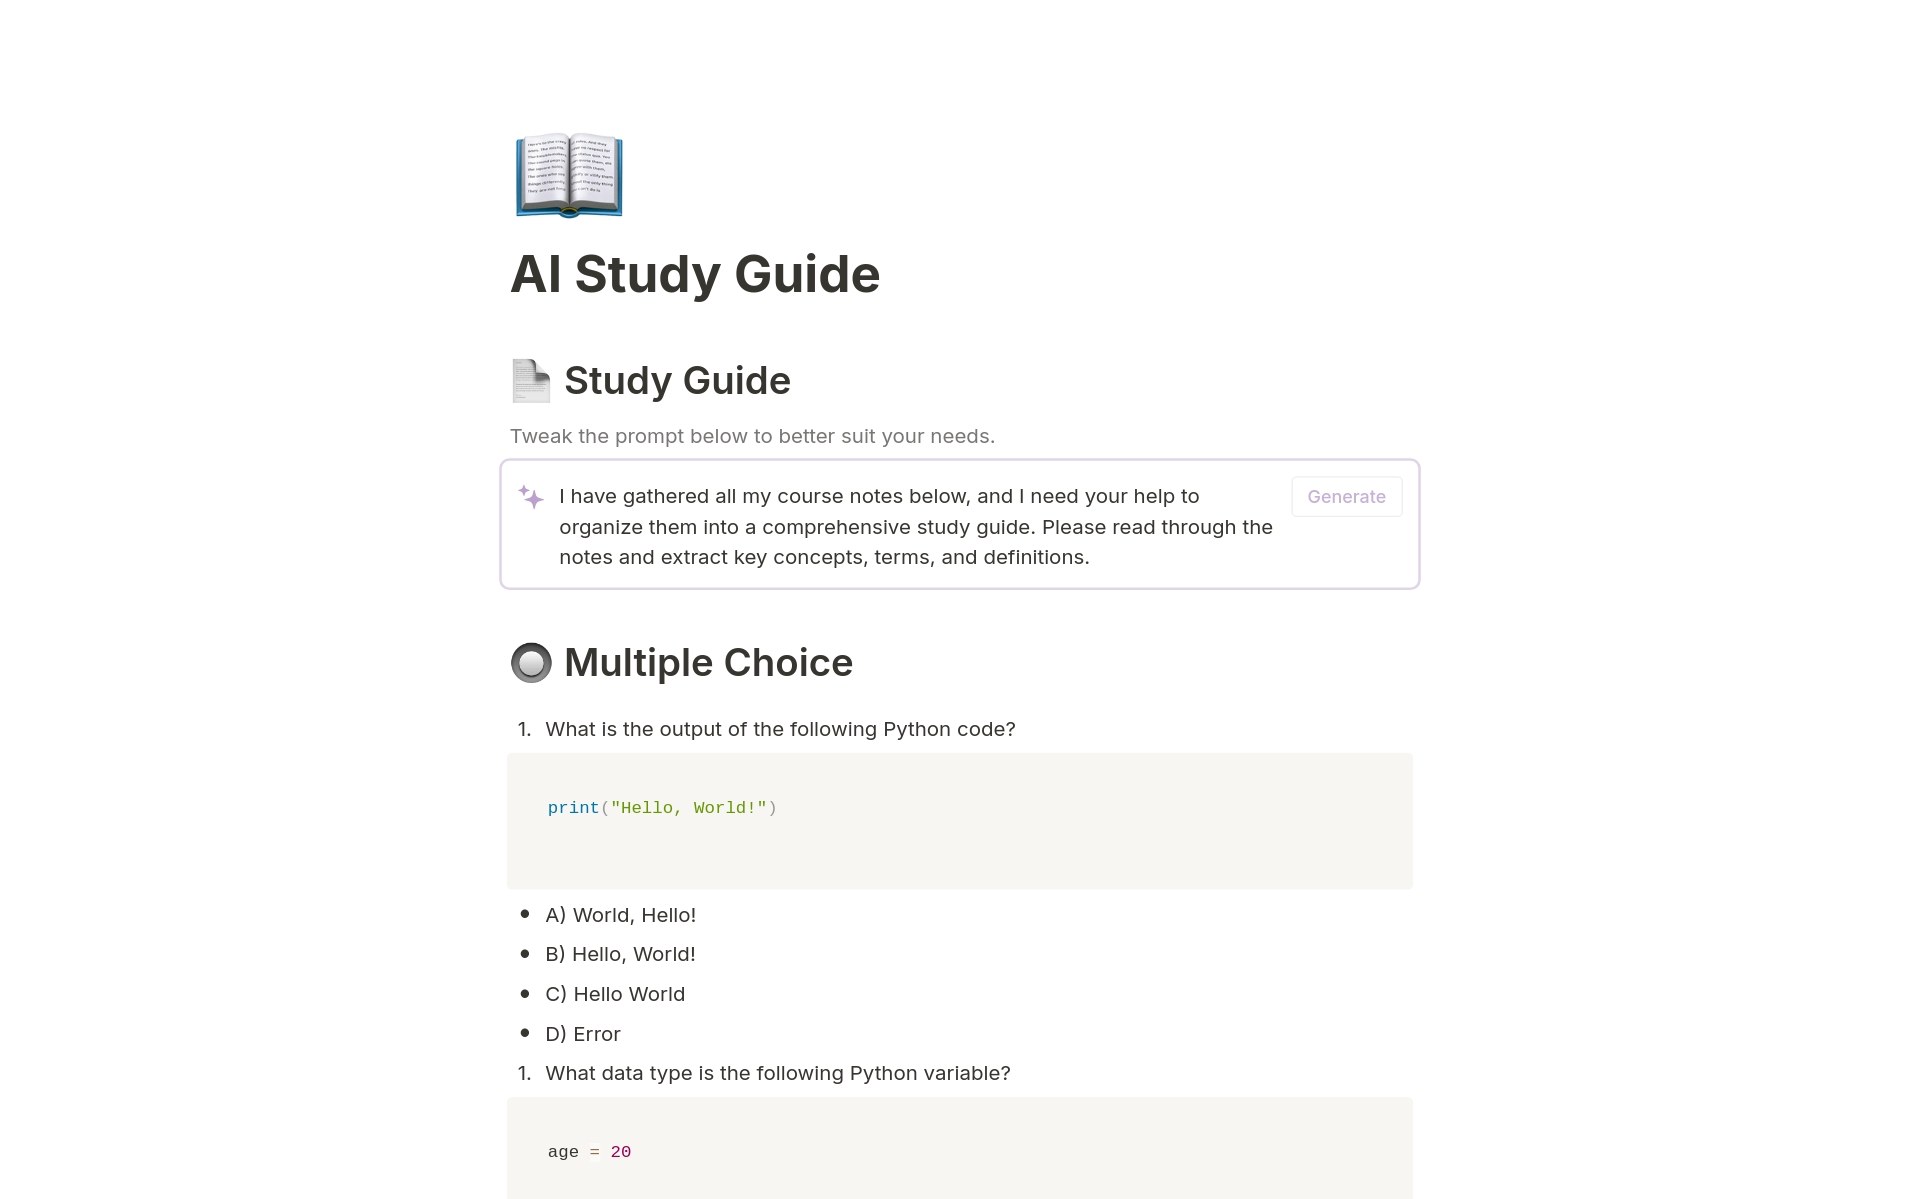 This AI Study Guide template organizes your course notes into a structured study guide with summaries, key concepts, important terms, flashcards, and practice questions. It's designed to help students of any subject efficiently review and understand their course material.